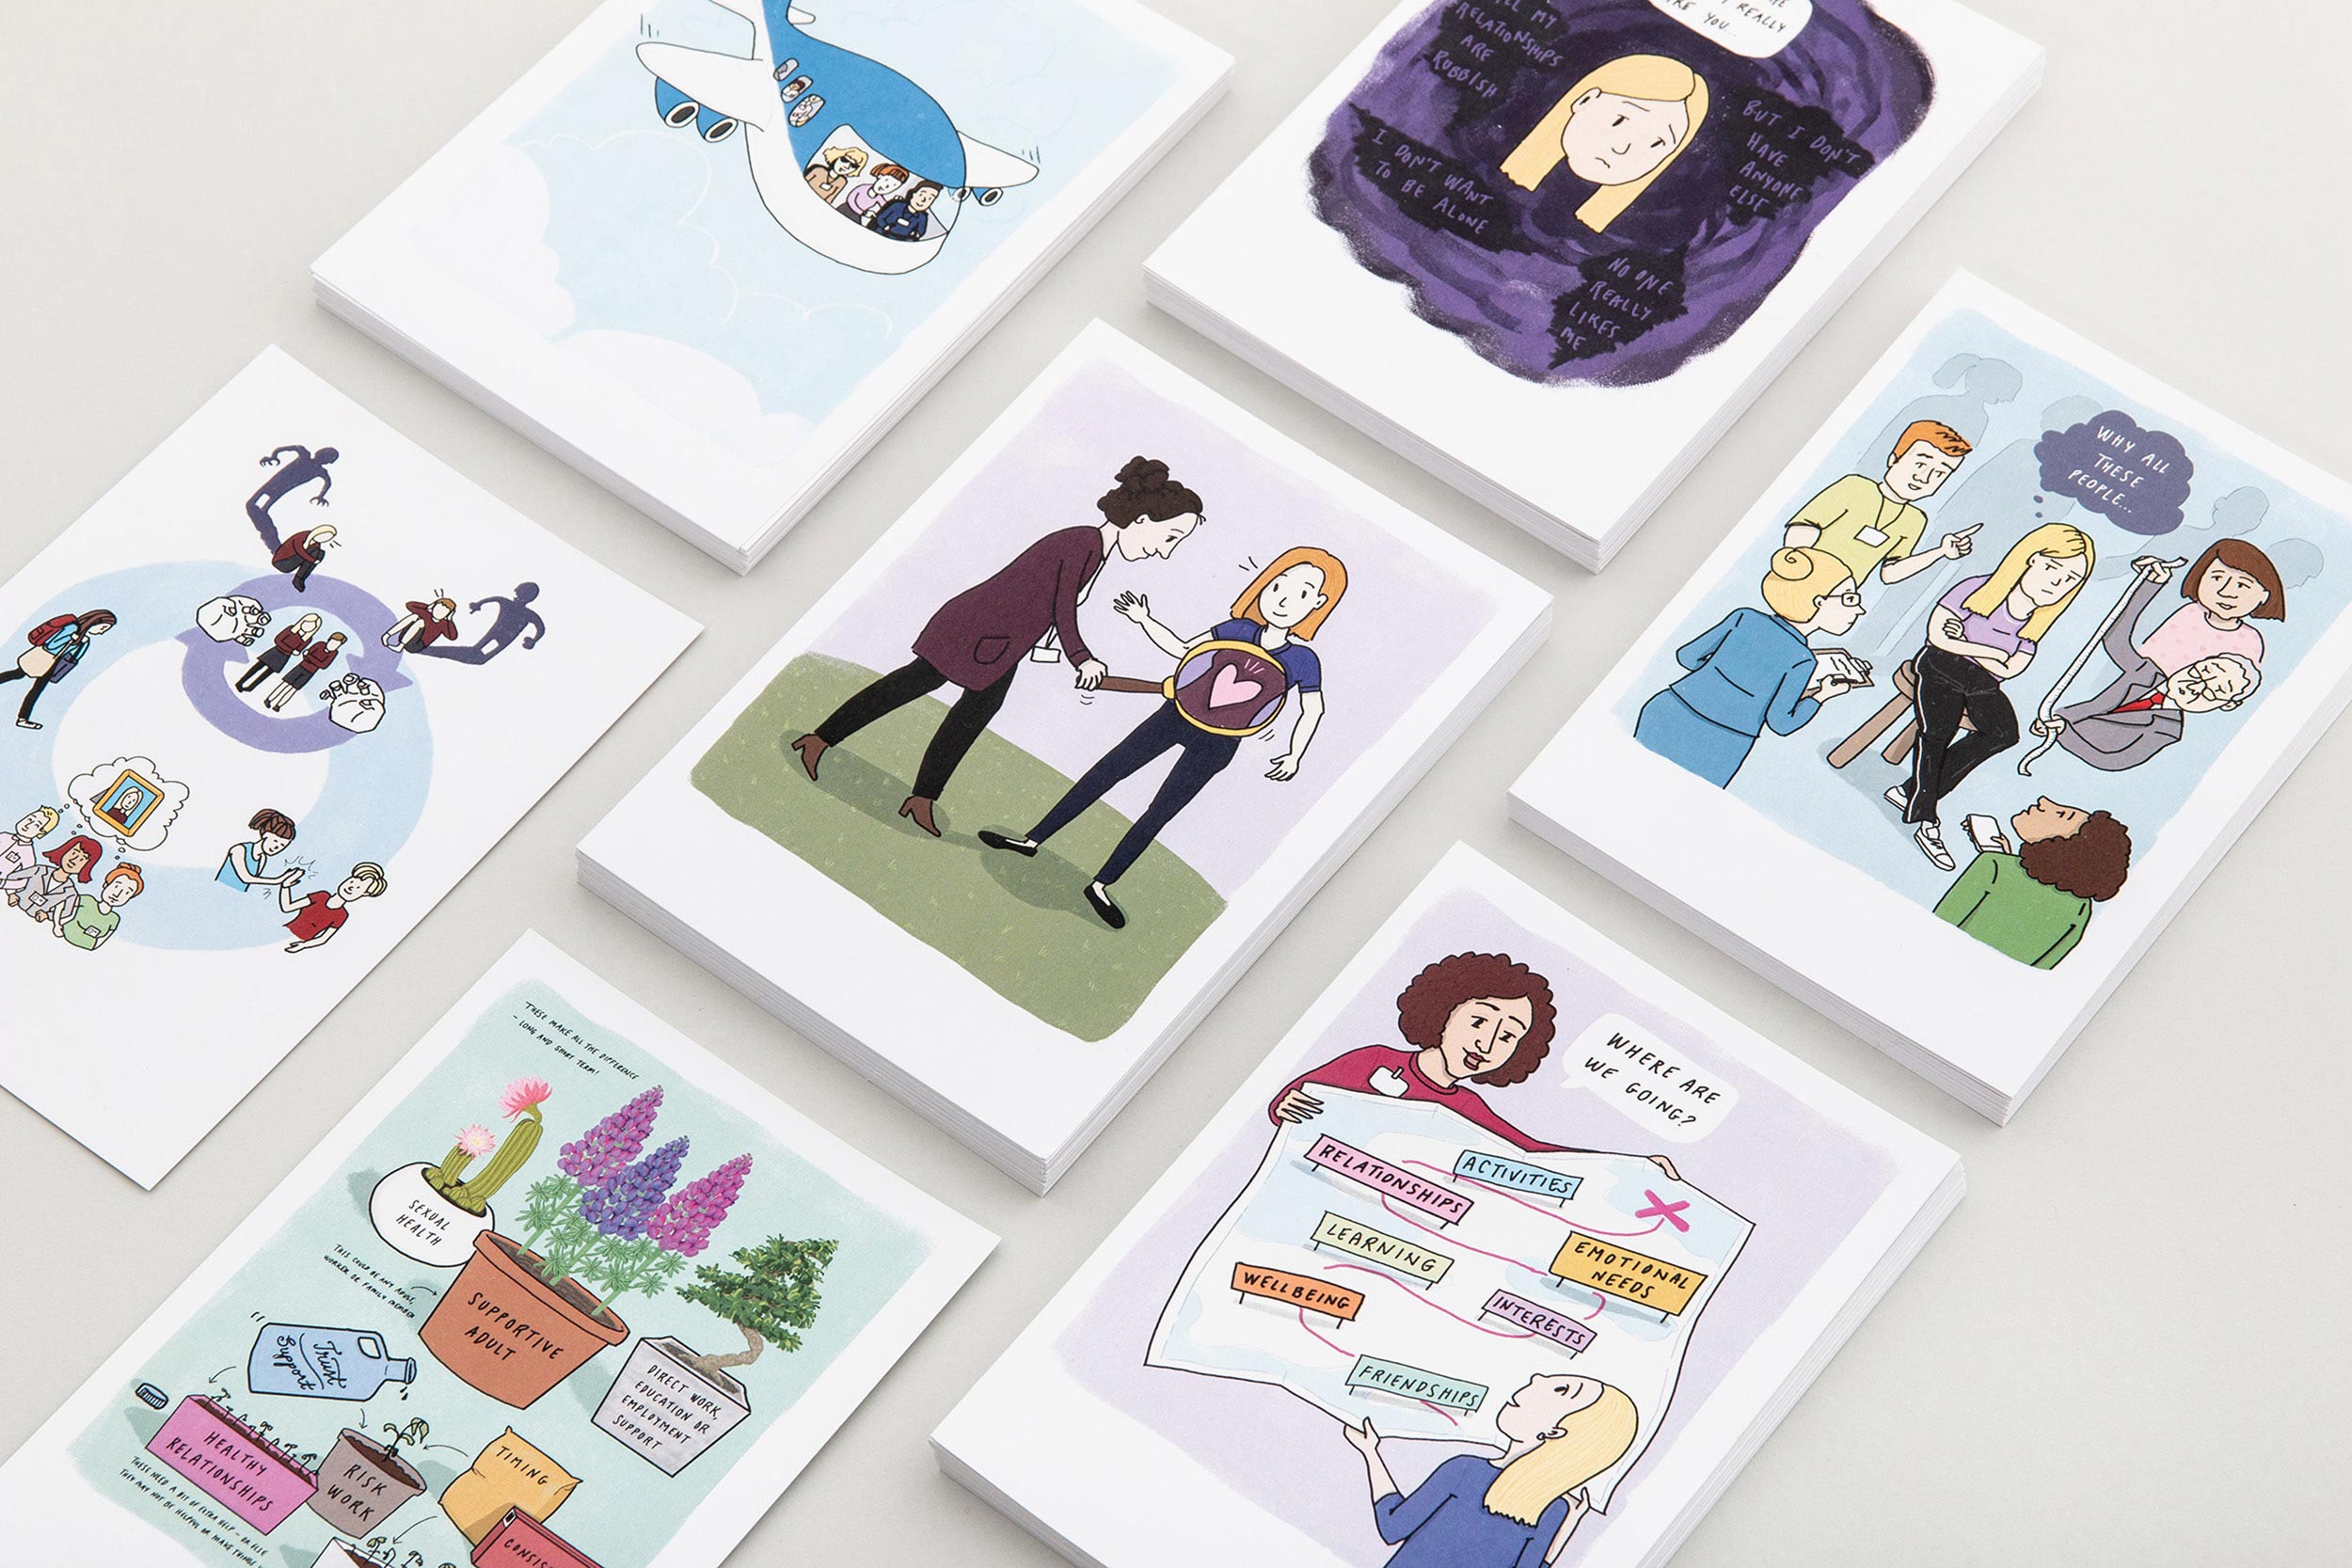 Stacks of postcards on a table with different illustrations on them about young people and safeguarding